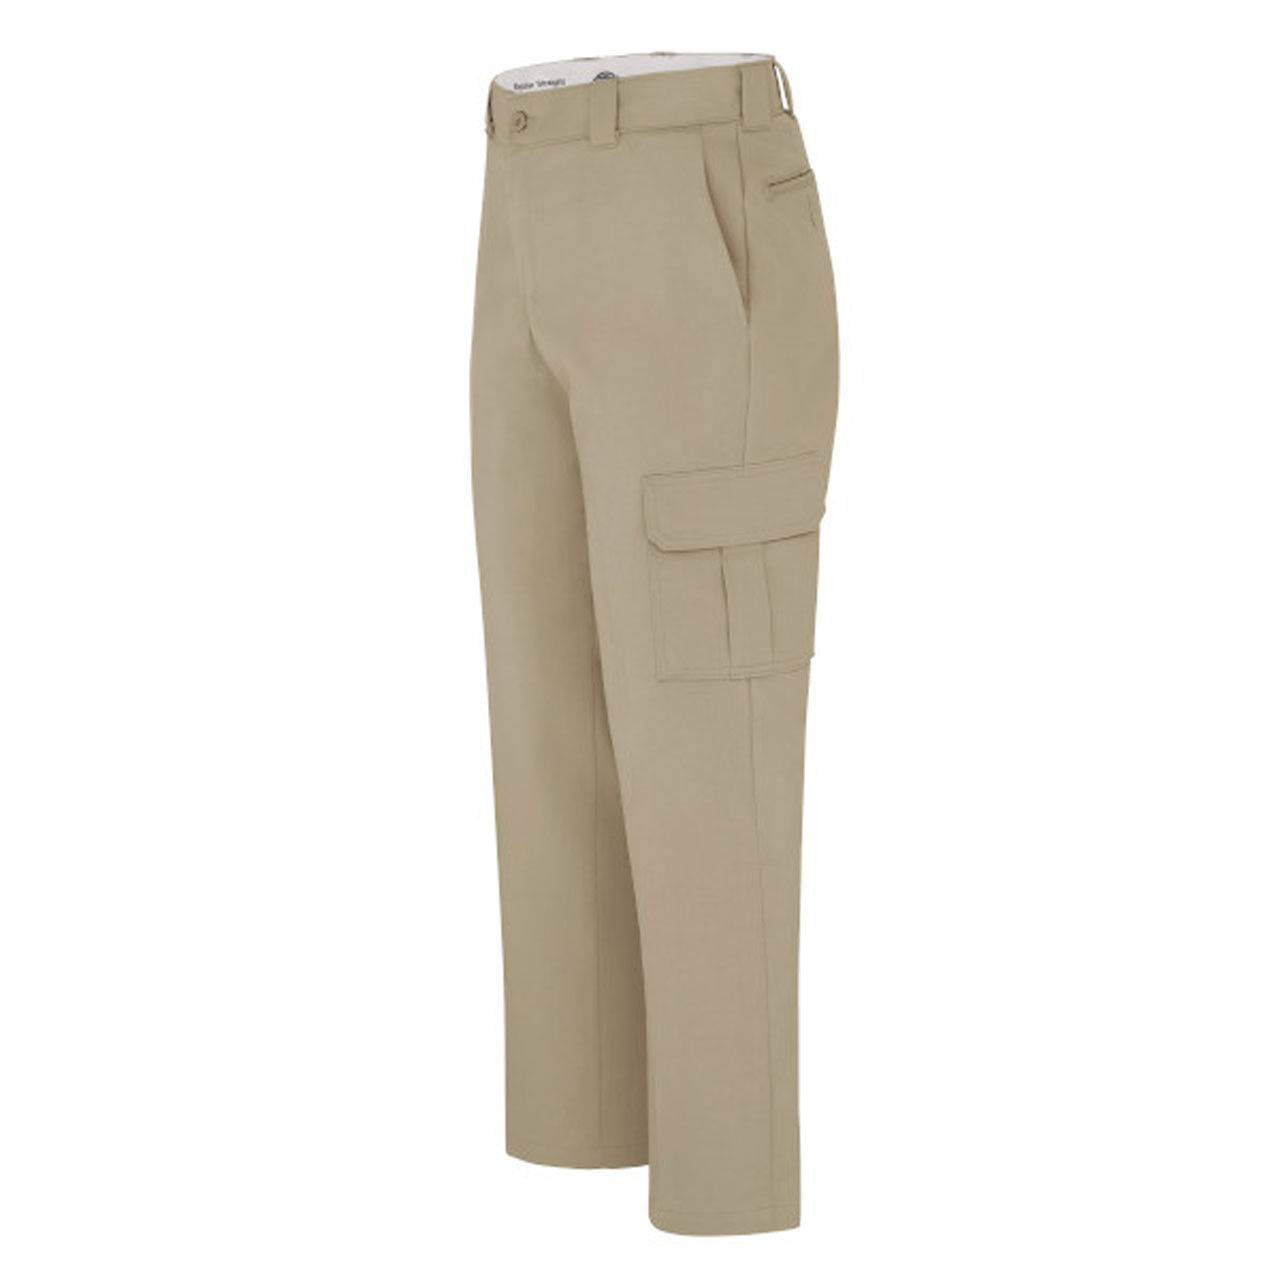 Do Dickies insulated pants have the same pocket types as Men's Cargo Pant?